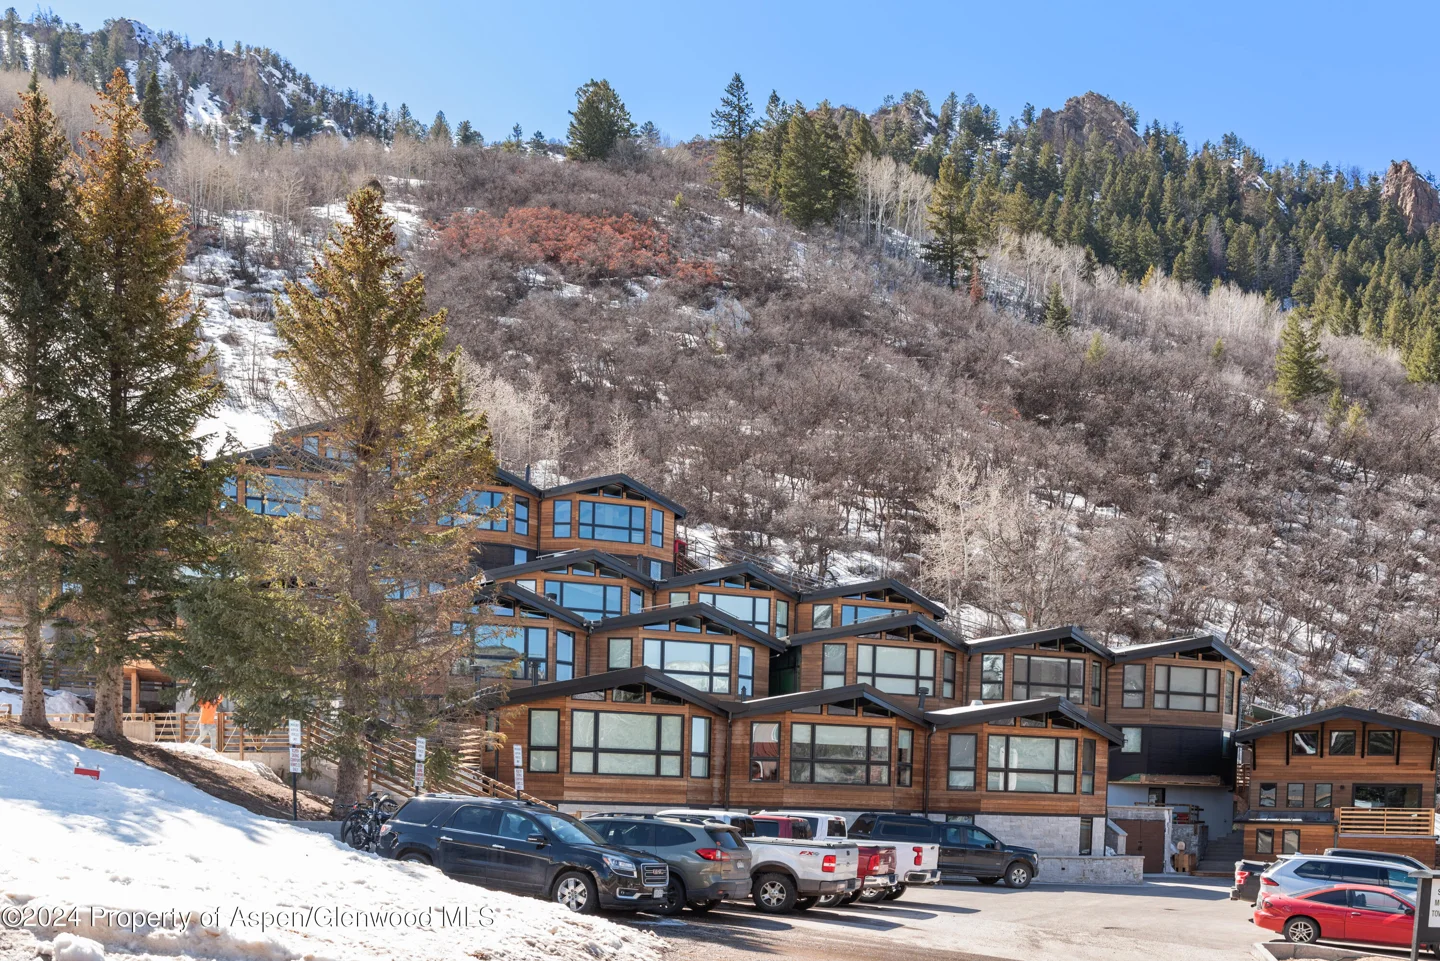 2 Bedroom Shadow Mountain Condo Recently Remodeled